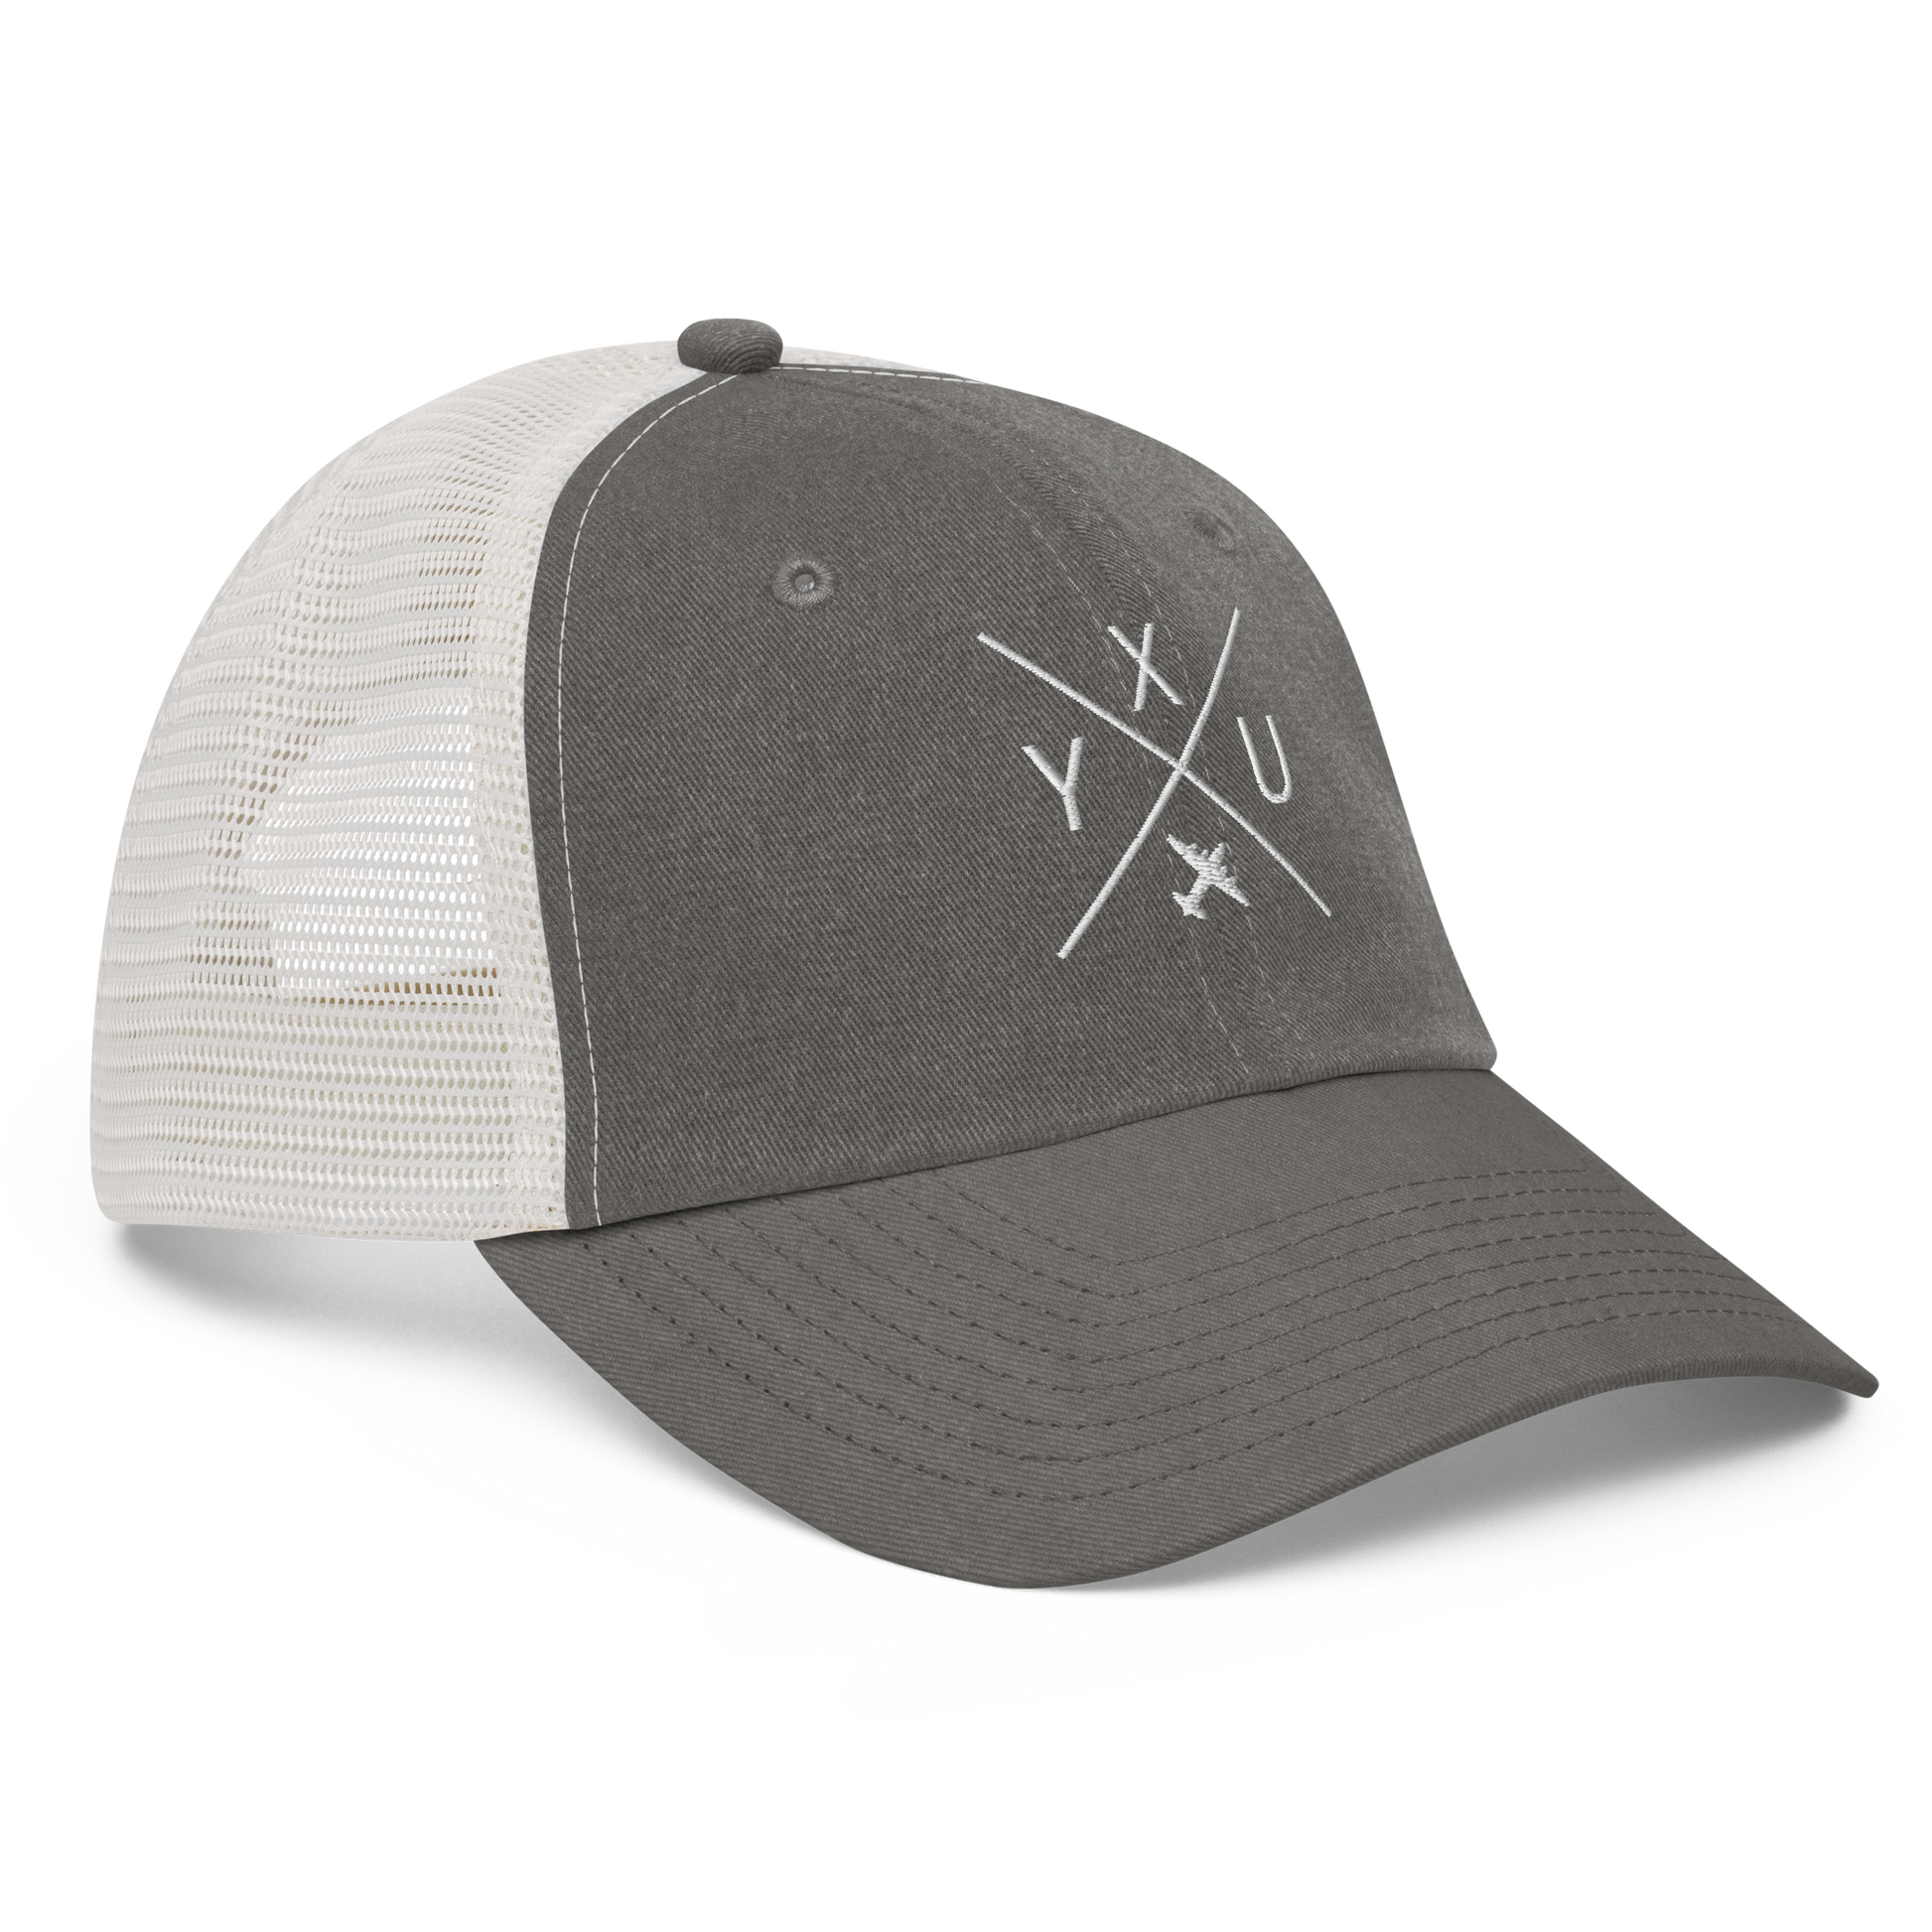 YHM Designs - YXU London Pigment-Dyed Trucker Cap - Crossed-X Design with Airport Code and Vintage Propliner - White Embroidery - Image 10